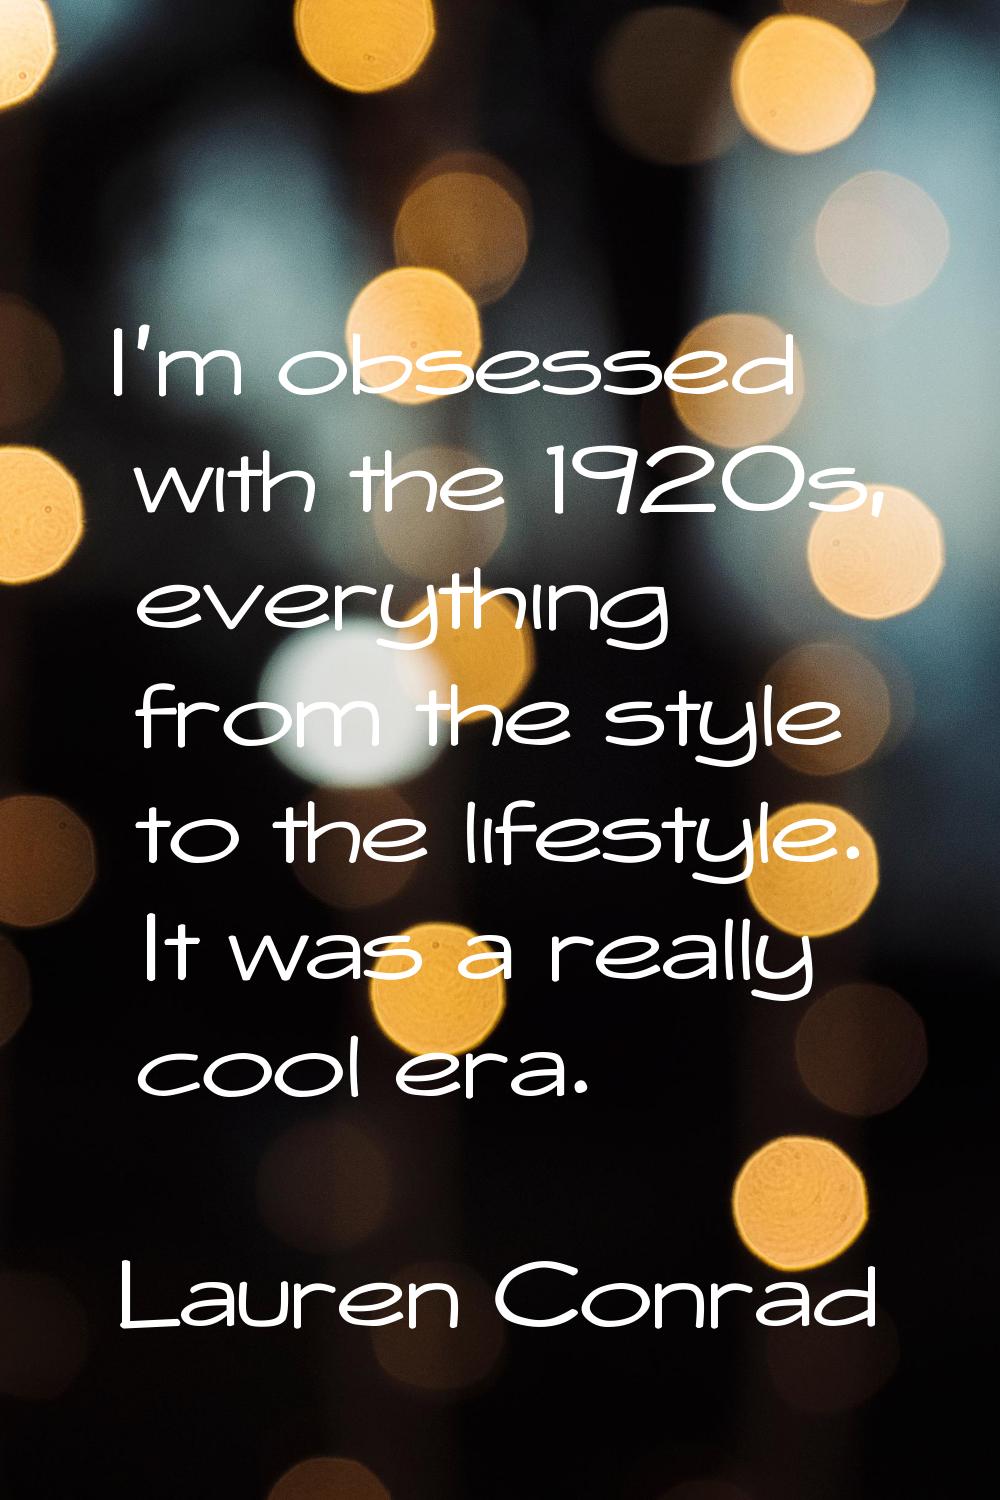 I'm obsessed with the 1920s, everything from the style to the lifestyle. It was a really cool era.